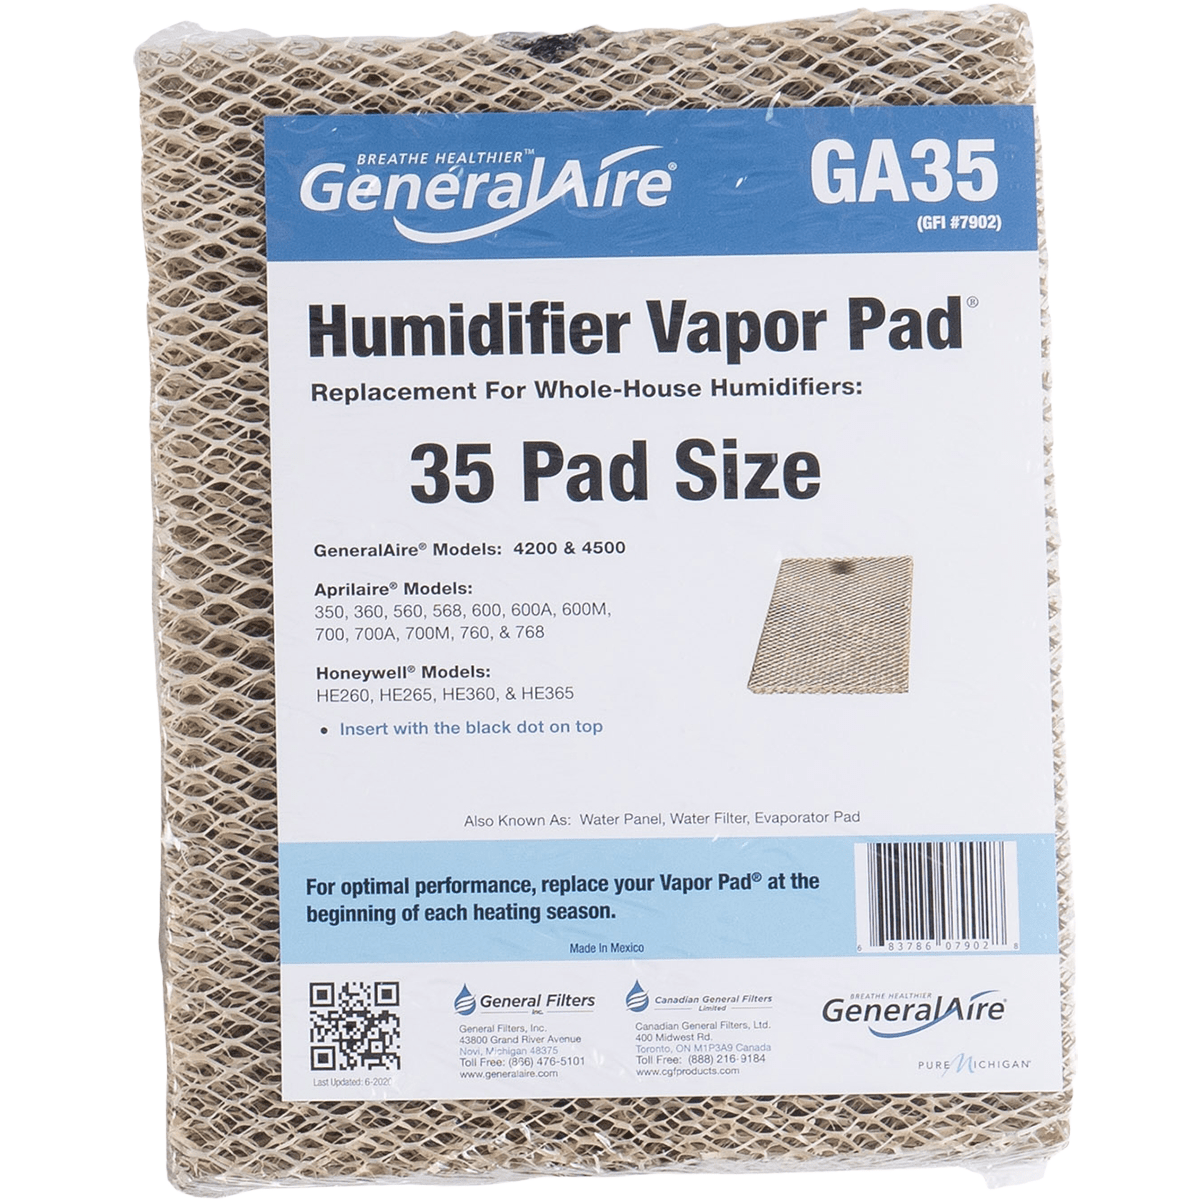 General Aire GA35 Vapor Pad (for 4200 & 4400)